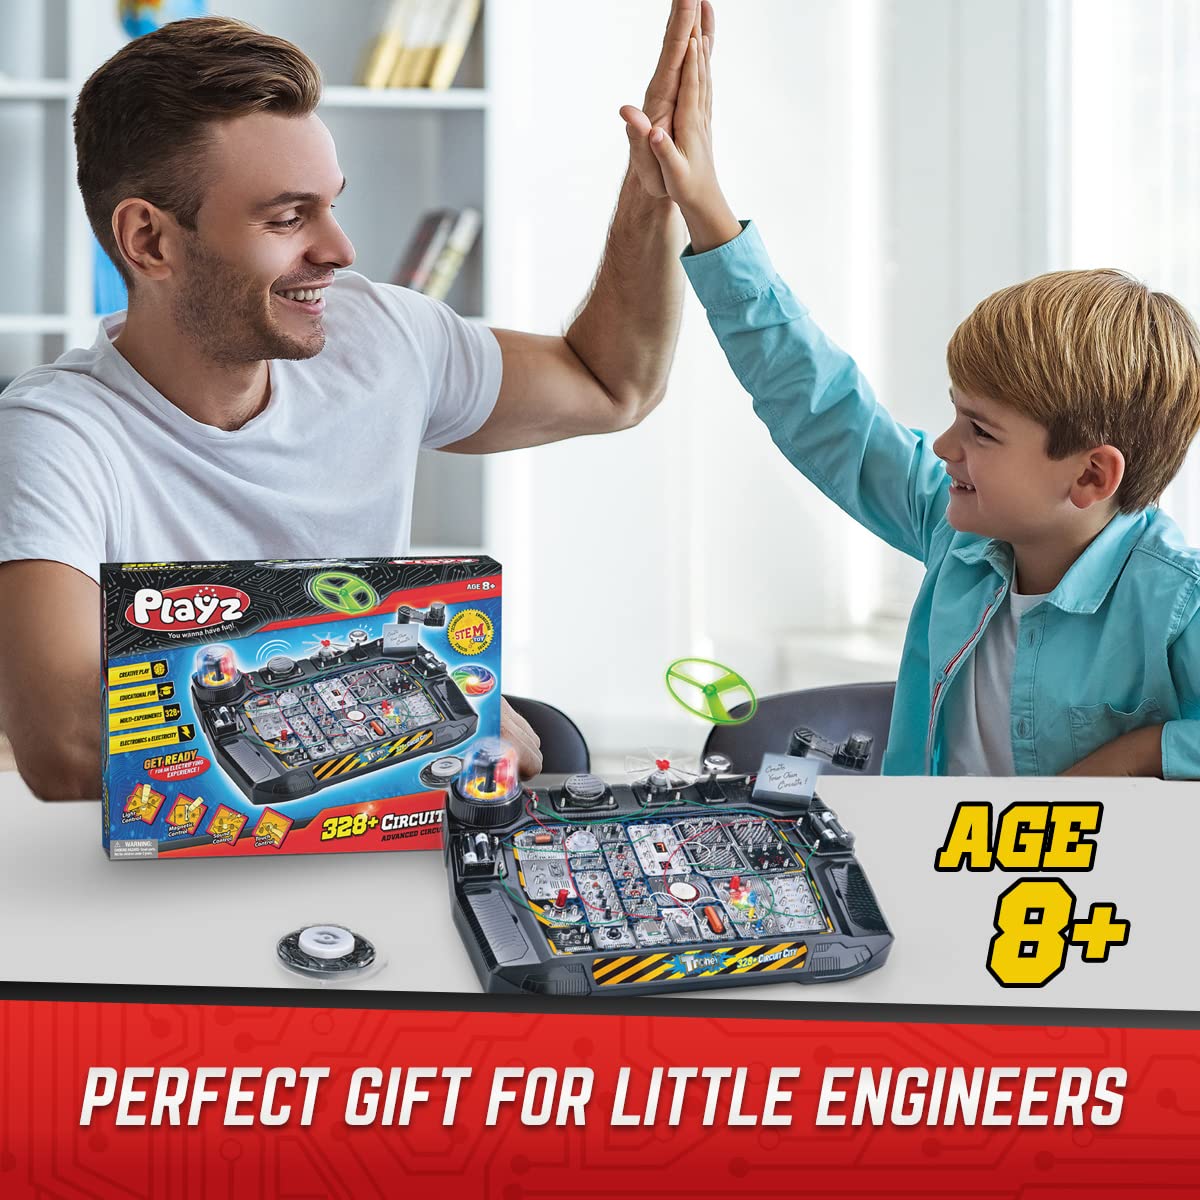 Playz Advanced Electrical Circuit Board Engineering Kit for Kids with 328+ STEM Projects on Electricity, Voltage, Currents, Resistance, & Magnetic Science | Gift for Children Age 8-13+